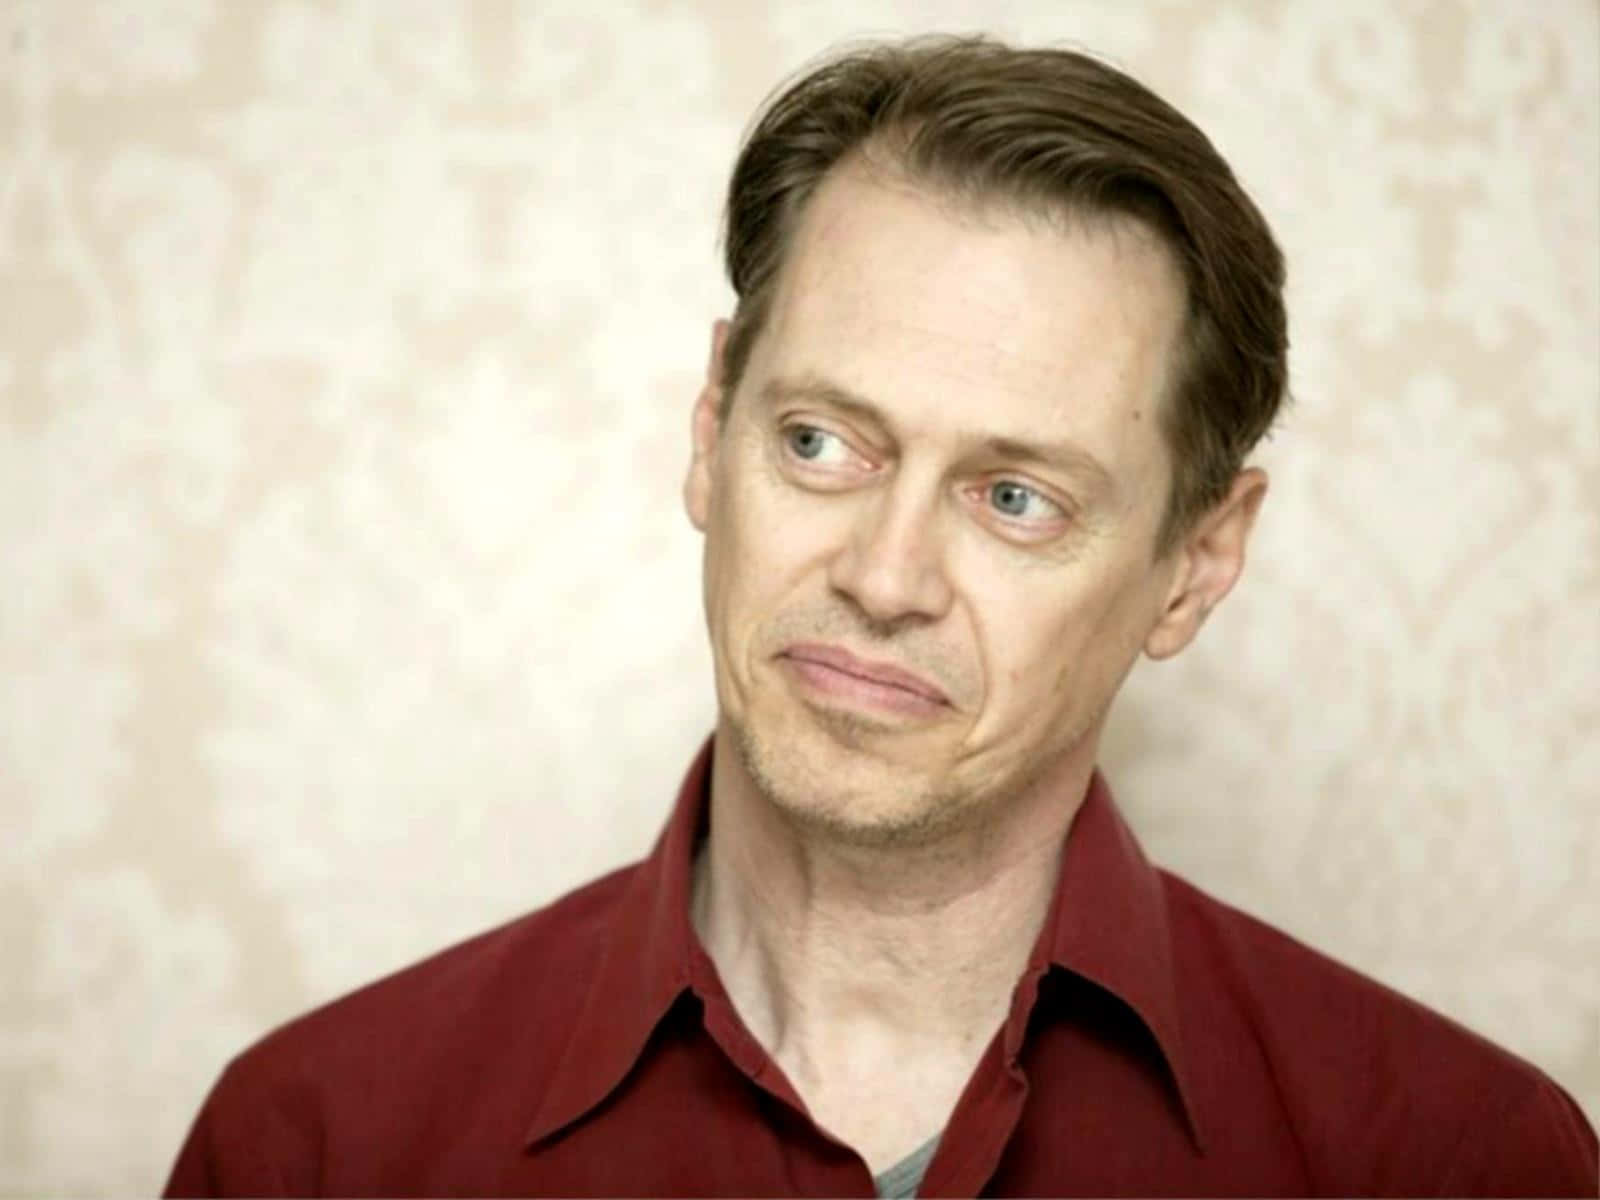 Veteran Hollywood Star Steve Buscemi In A Thoughtful Pose.